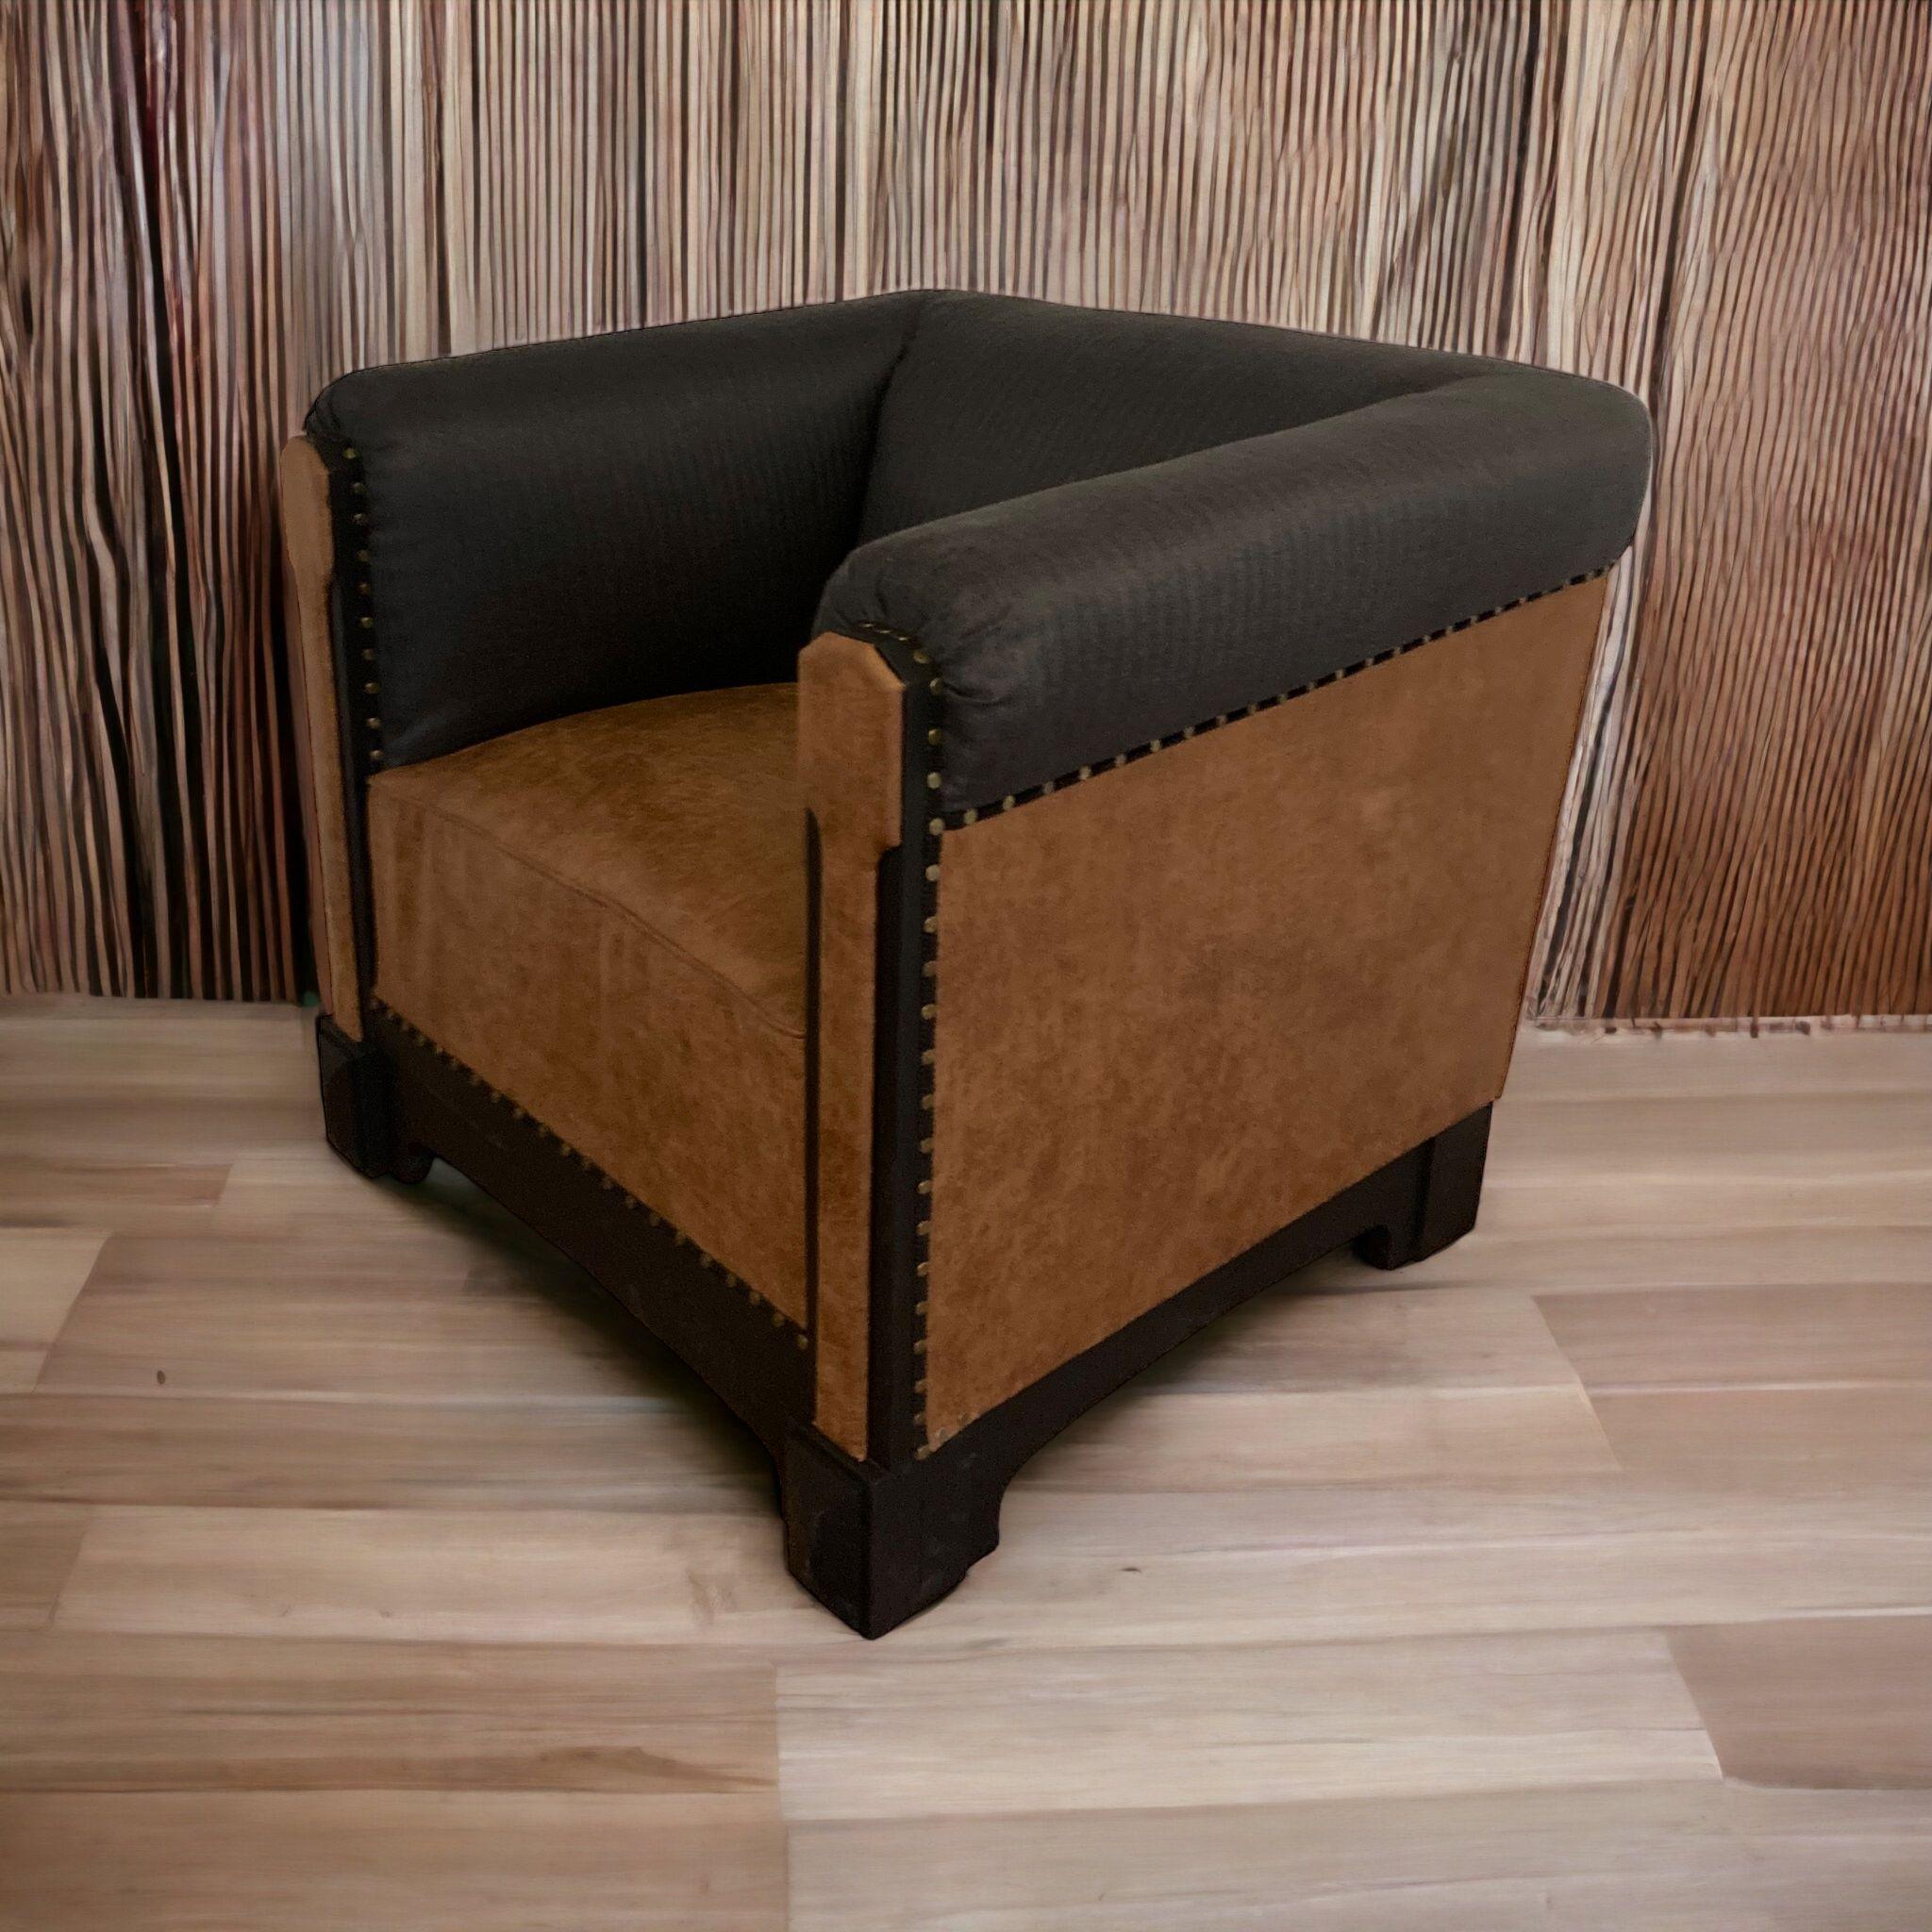 A beautiful rare Art Deco 19th Century French Club Chair. Thought to originate from Paris this chair has been professionally restored with a faux leather seat and sides finished with a Herringbone tweed fabric. It has been tastefully reupholstered